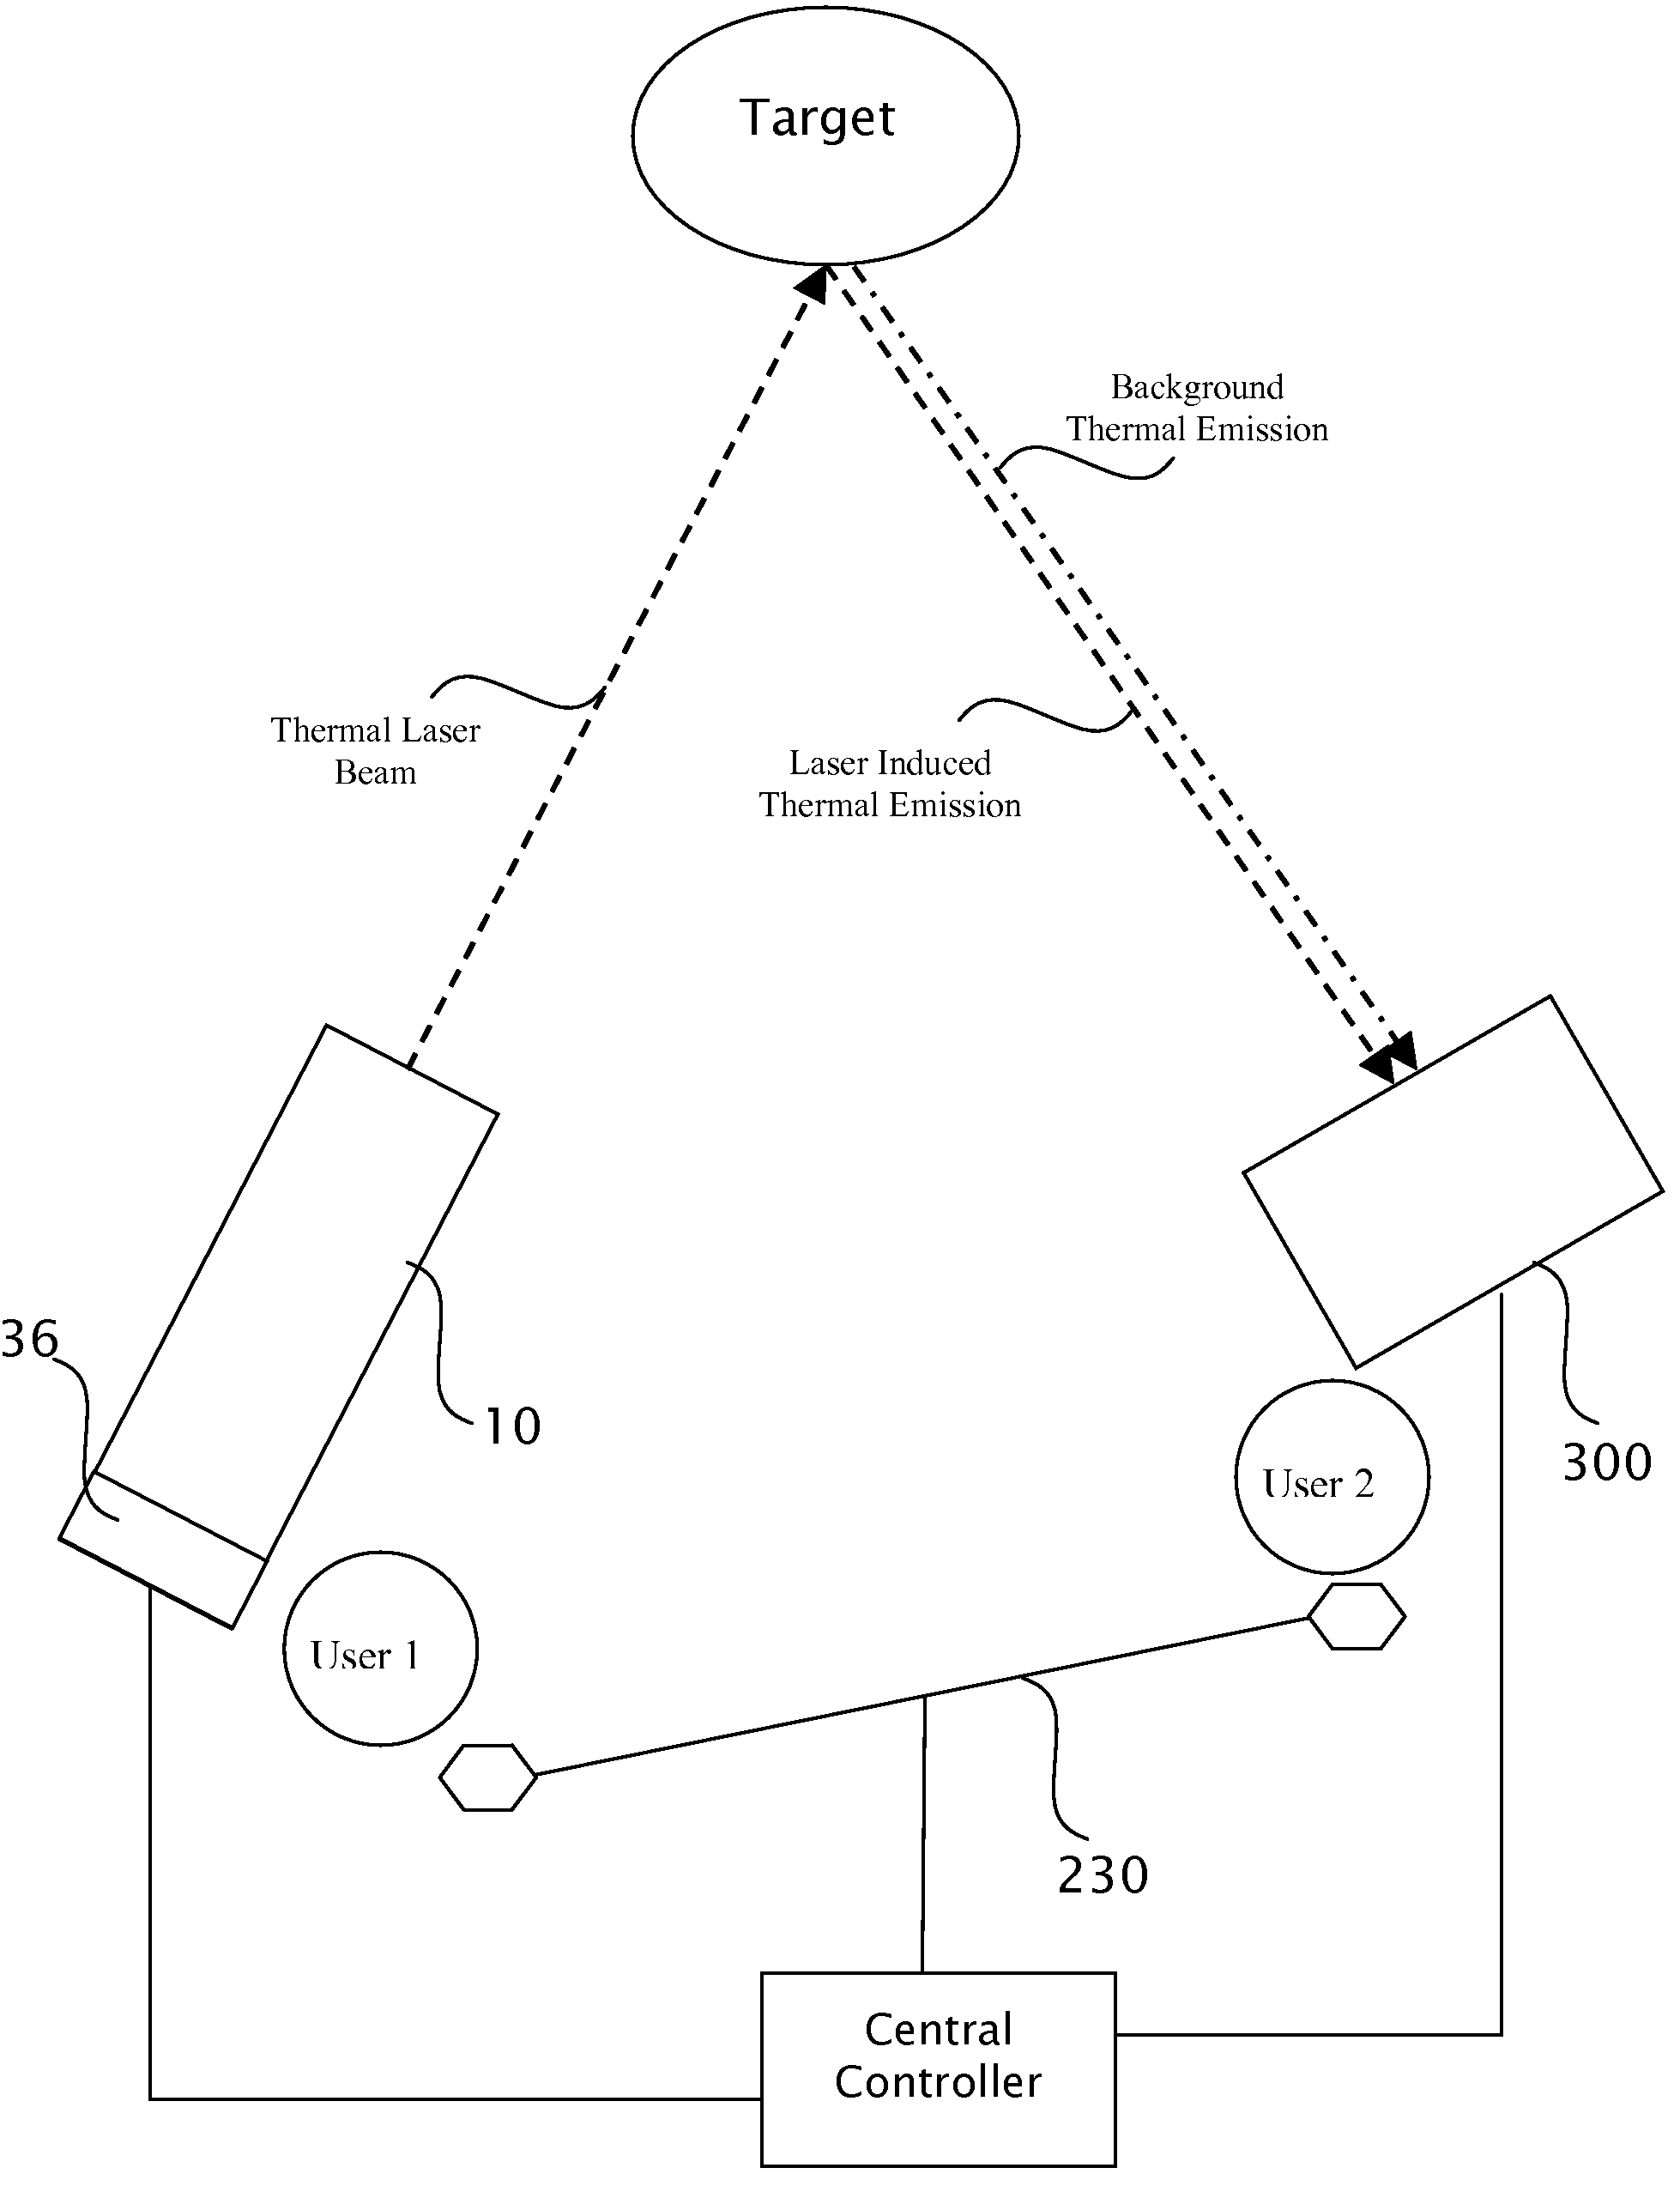 Target marking system having a gas laser assembly and a thermal imager